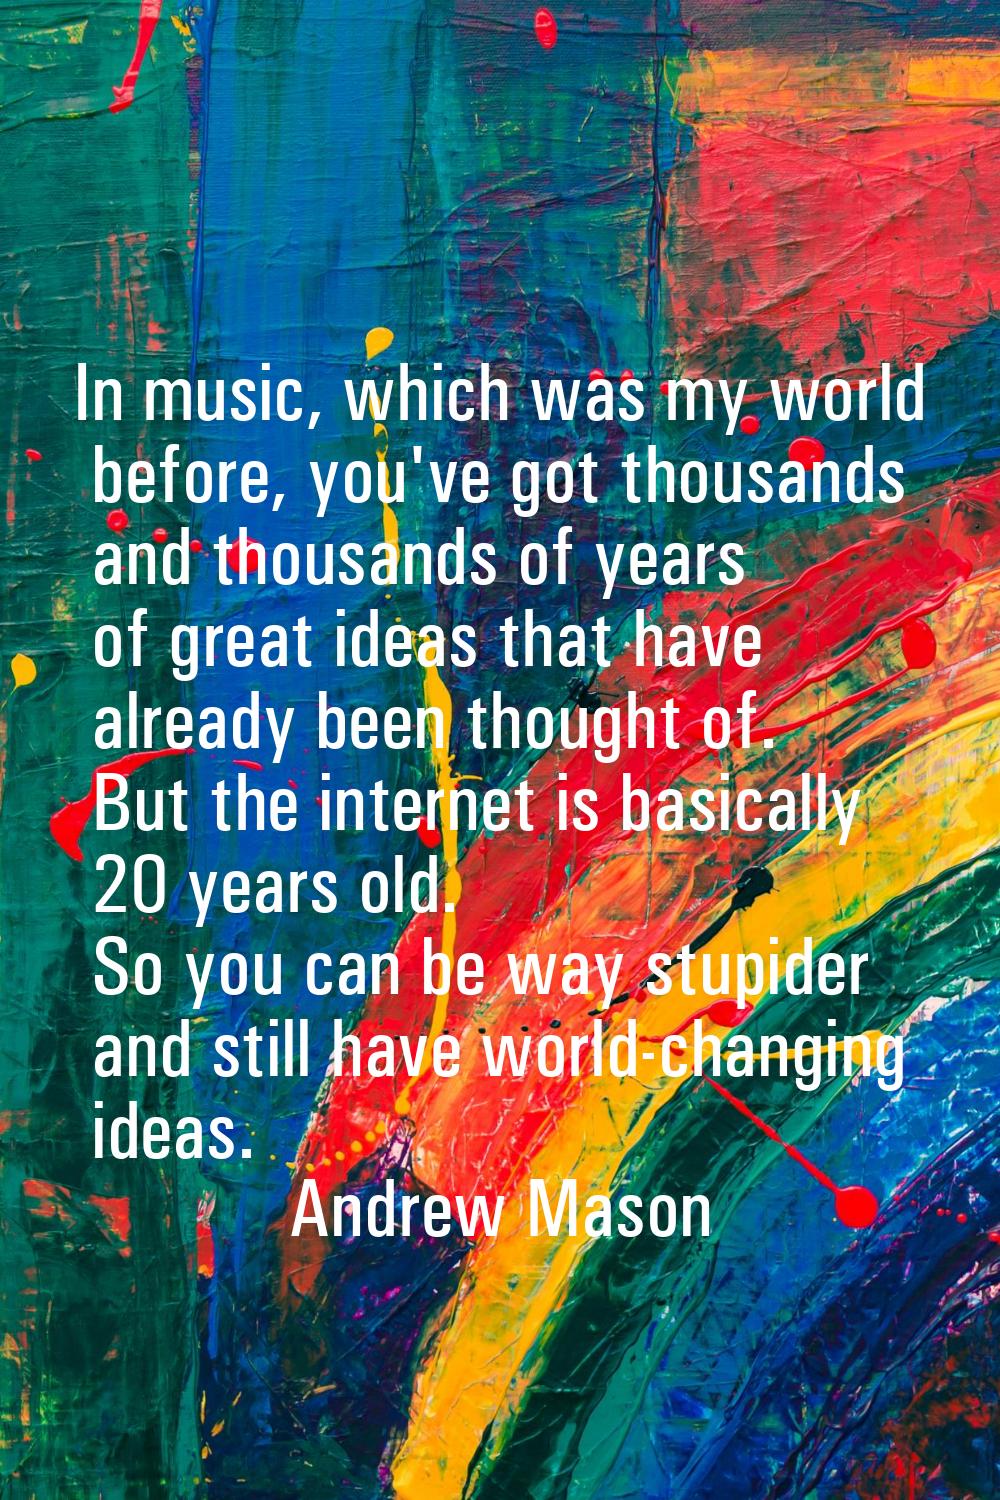 In music, which was my world before, you've got thousands and thousands of years of great ideas tha